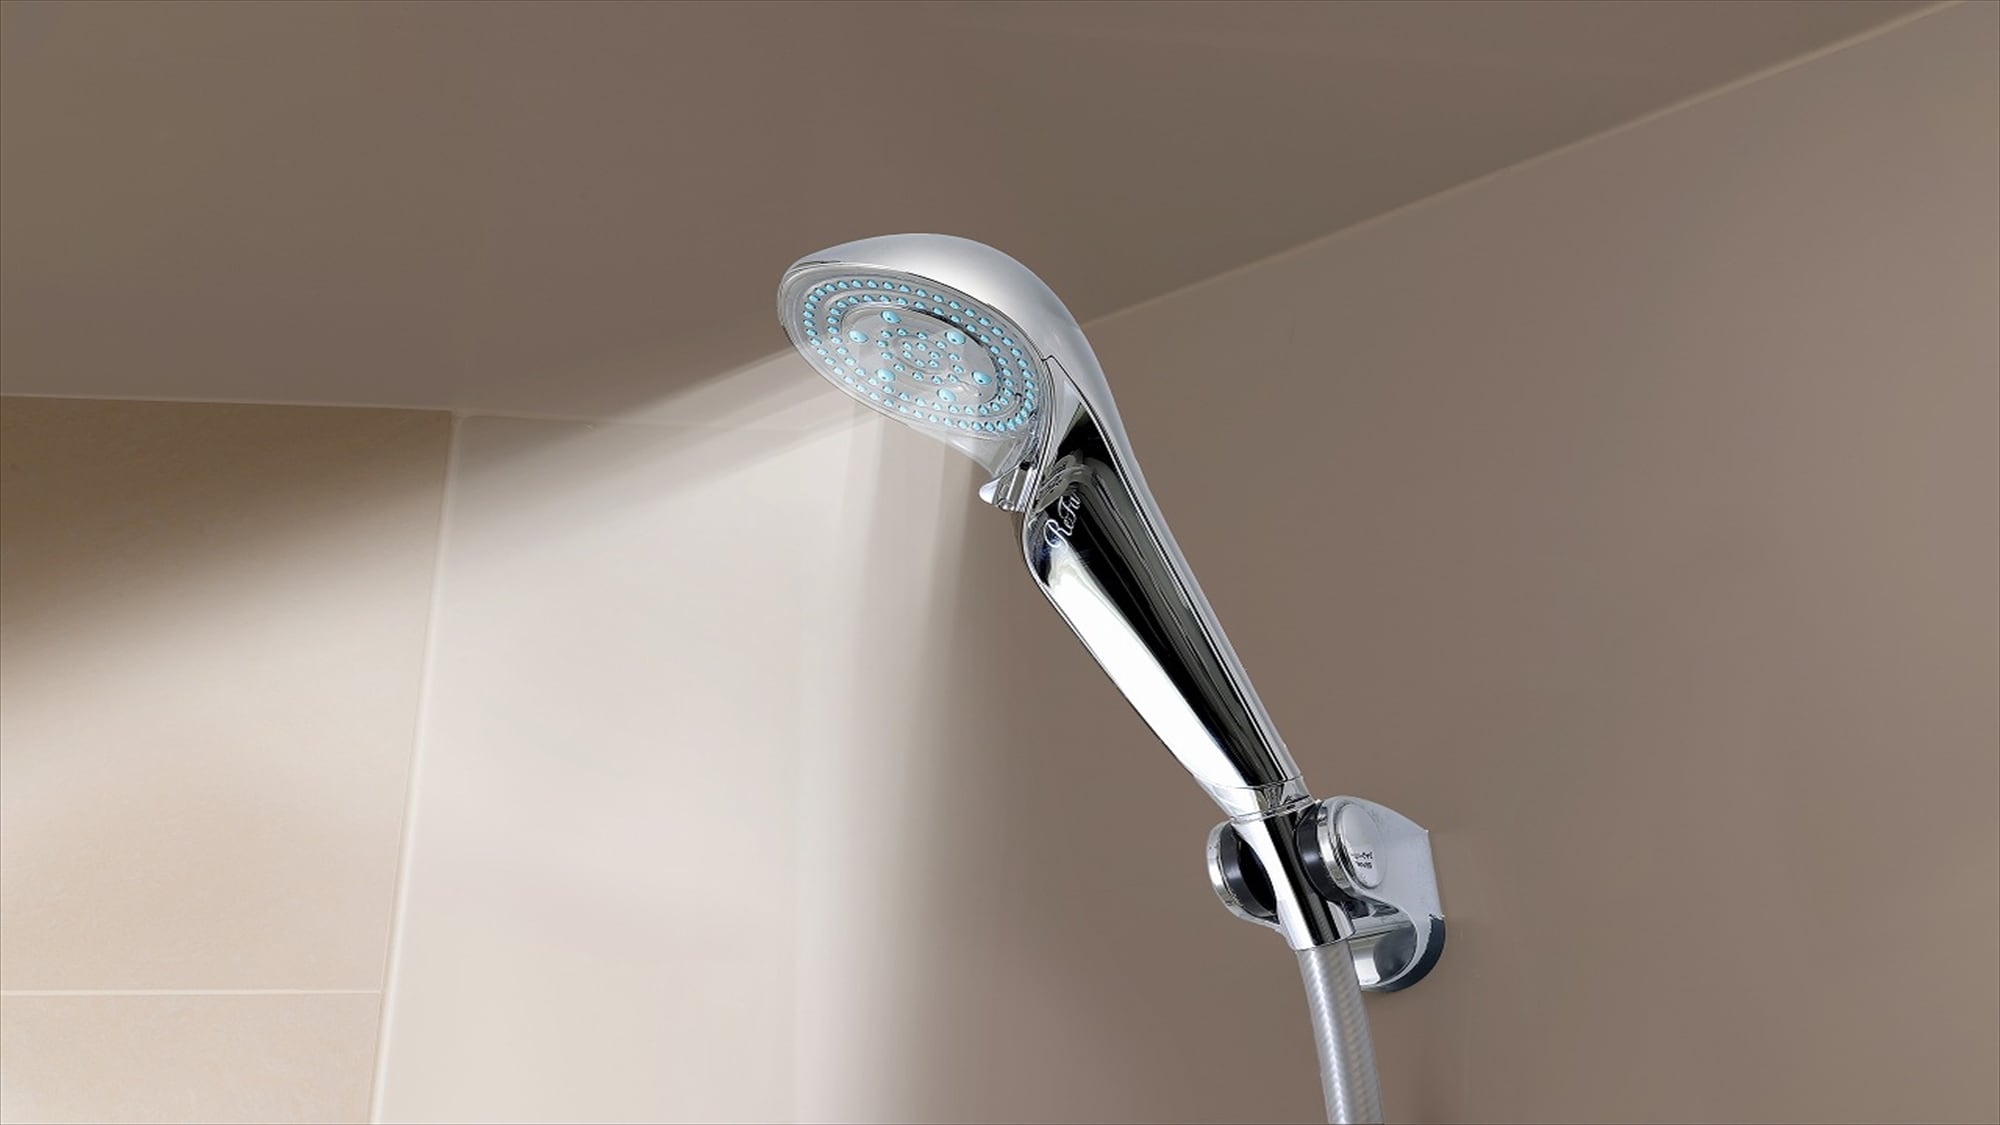 All guest rooms are equipped with shower heads for "ReFa"